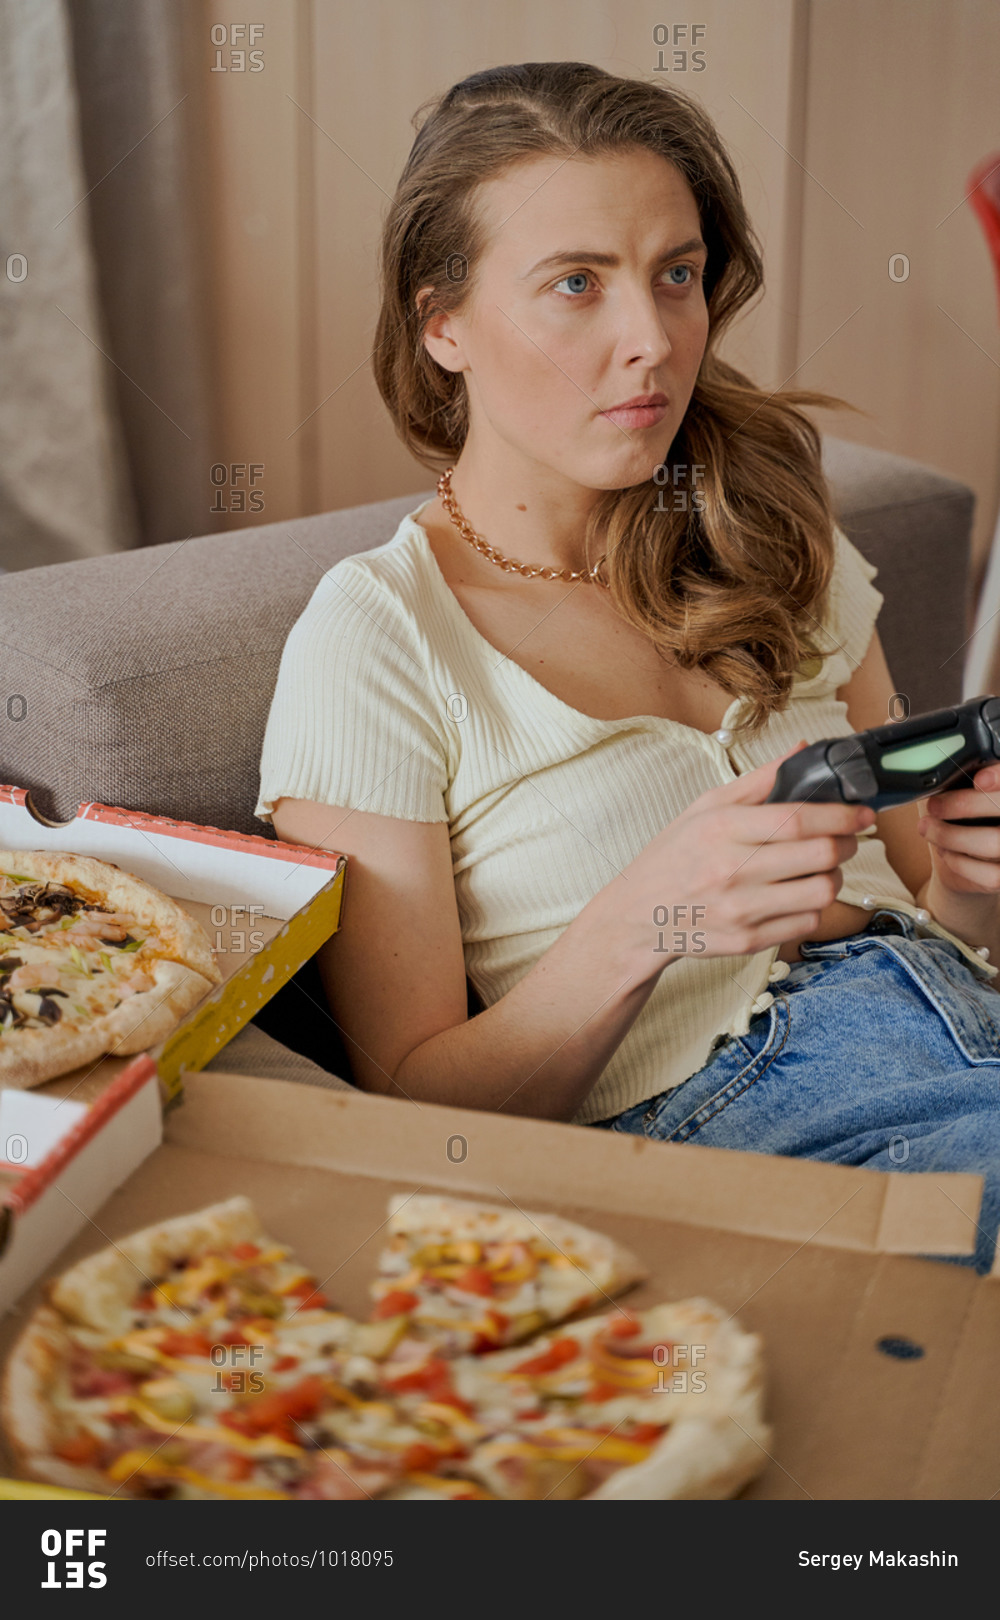 Blonde woman sitting on sofa eating pizza and playing video games